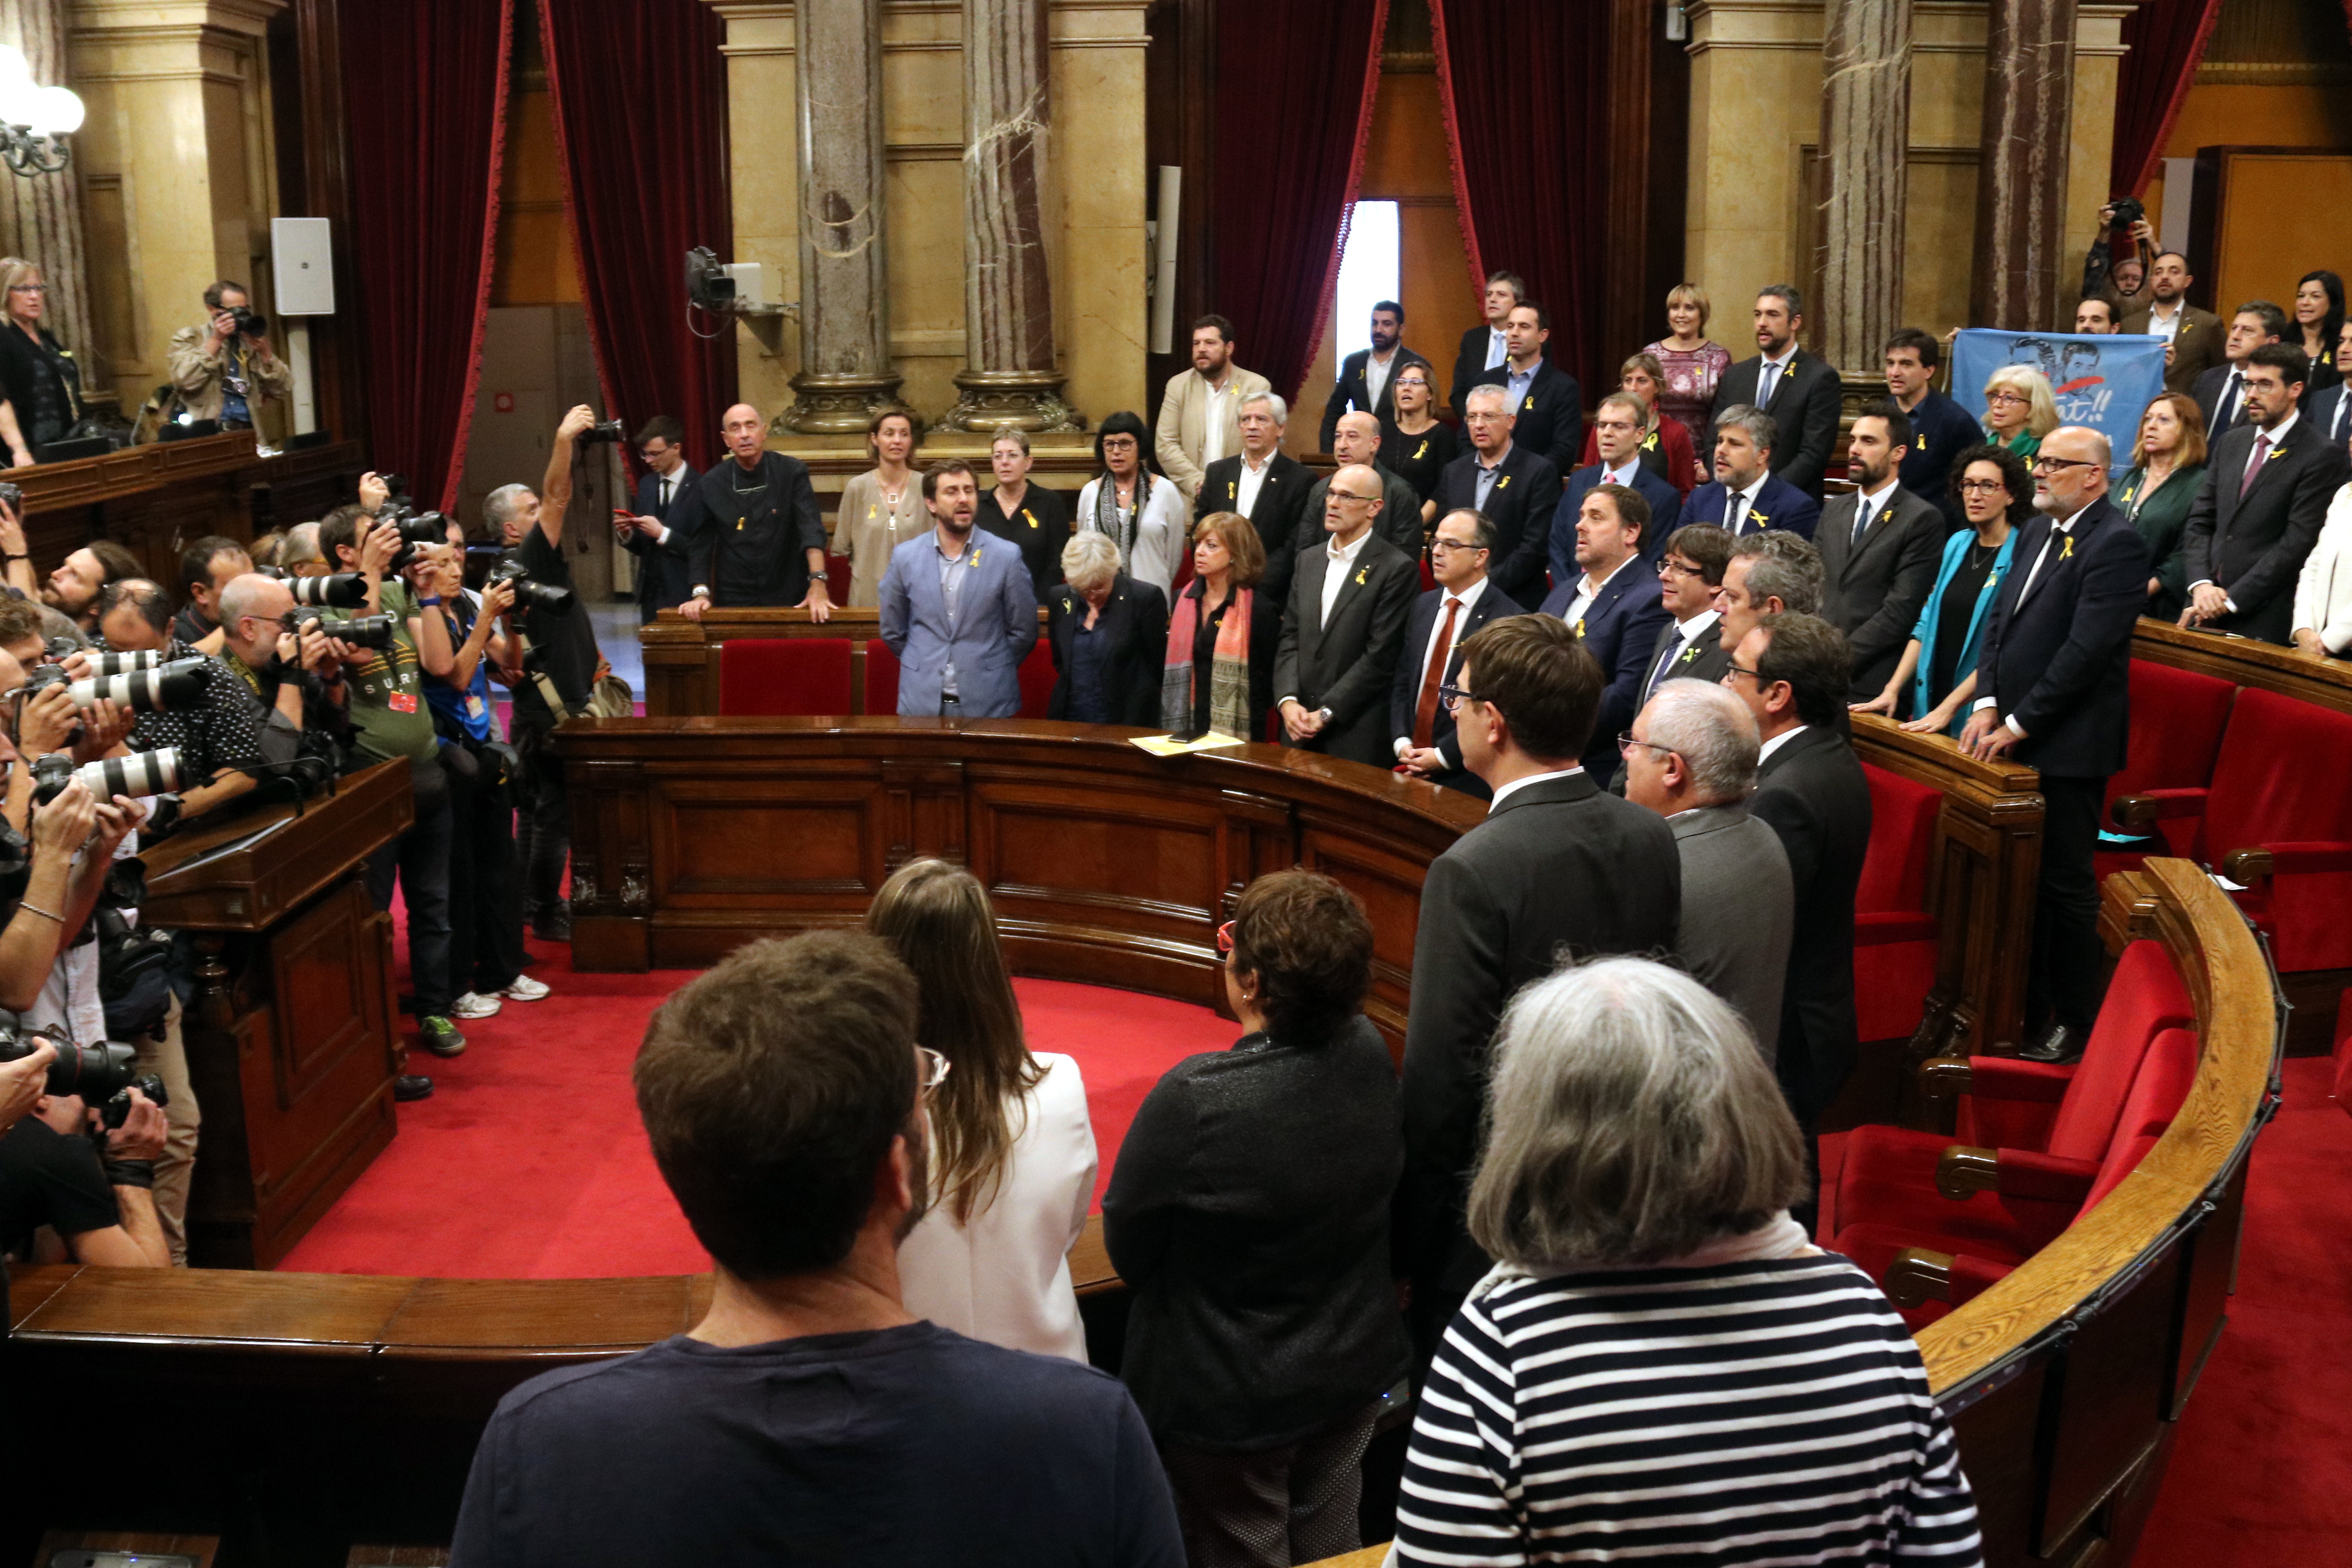 Catalan Parliament after voting on independence declaration (by Pere Francesch)